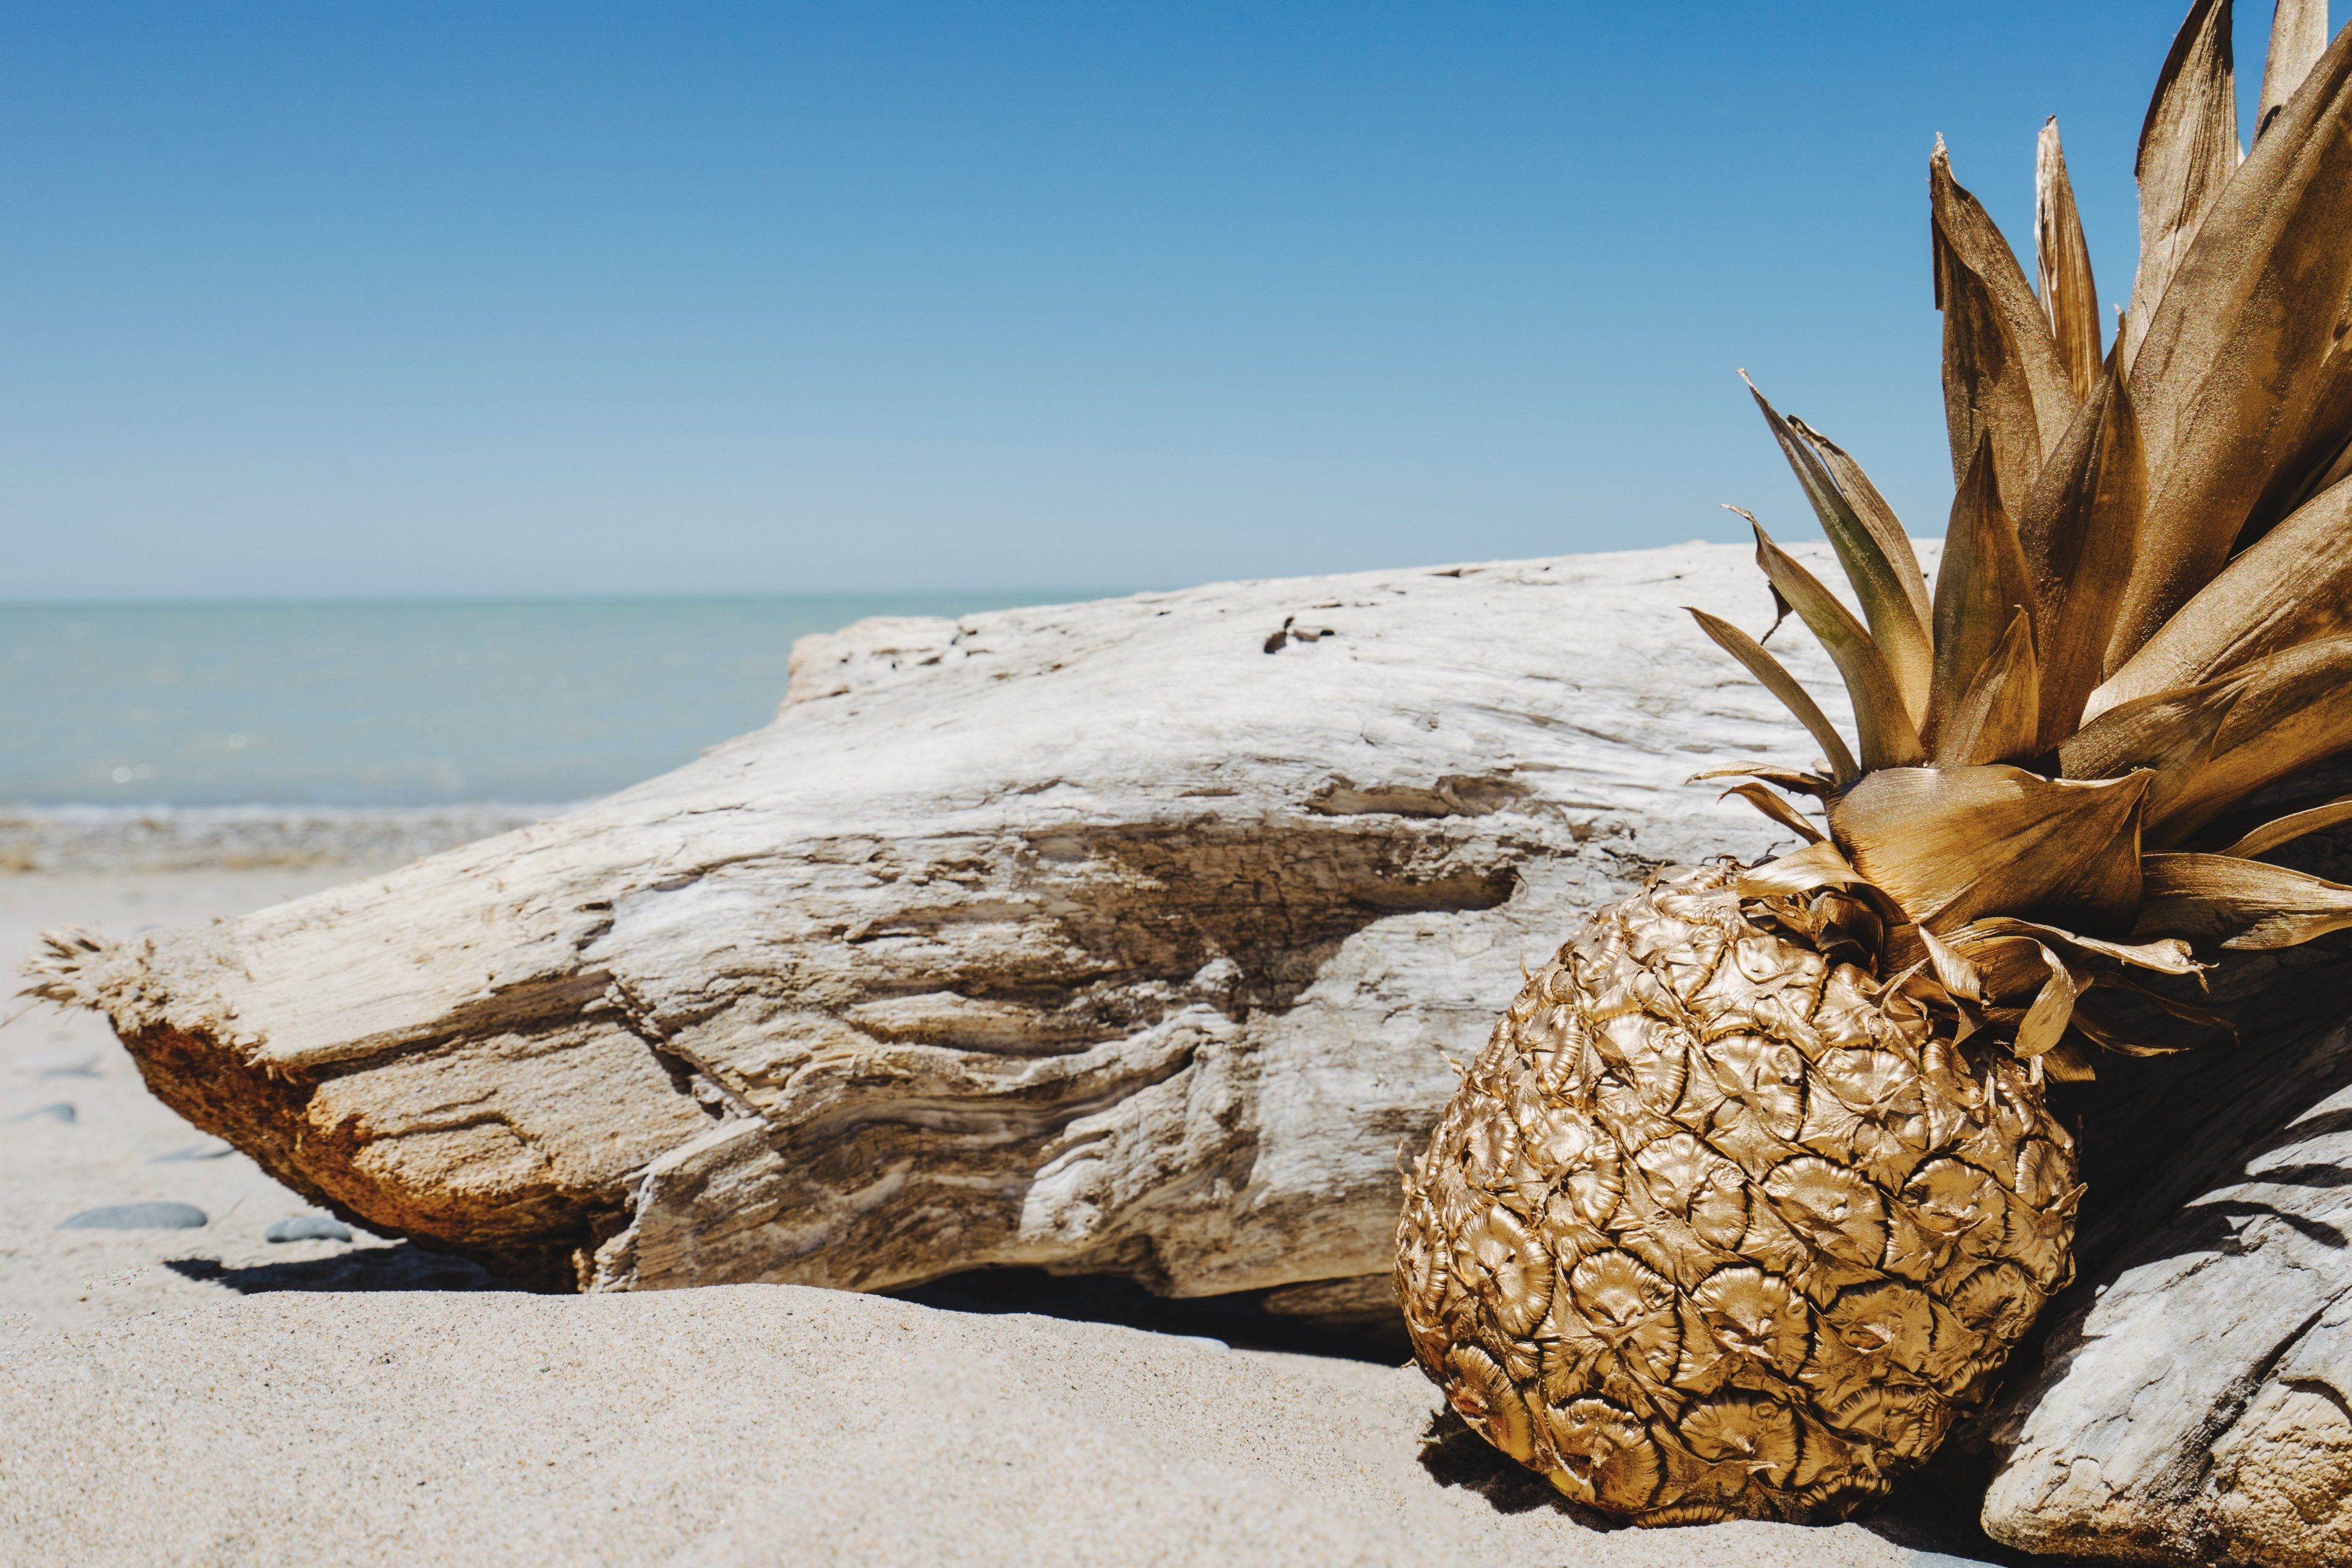 Wallpaper / a gold painted pineapple leaning against a piece of driftwood on a sandy beach, golden good vibes 4k wallpaper